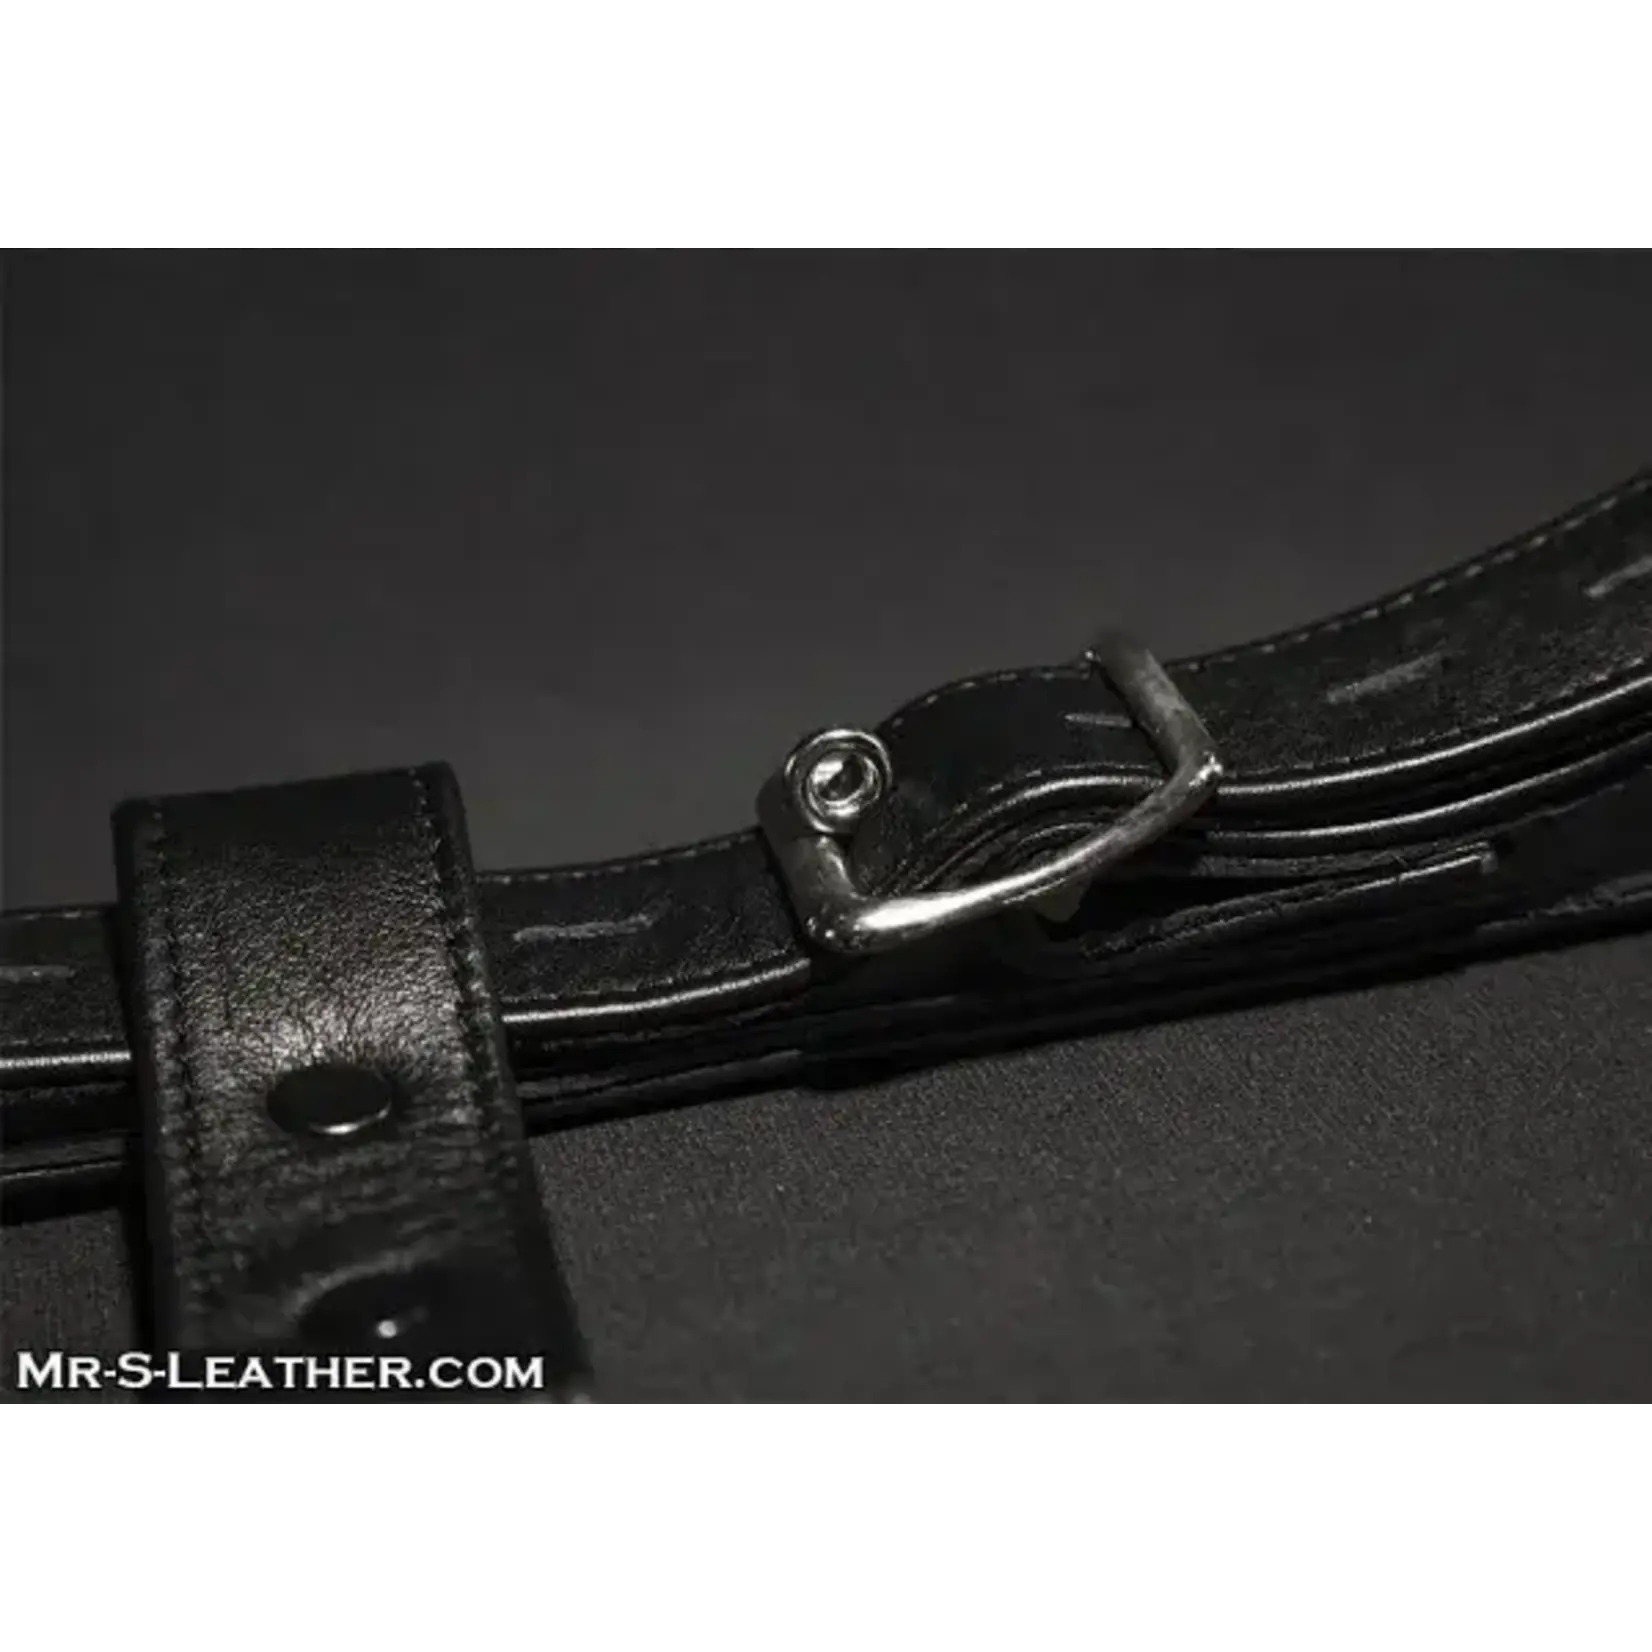 Mr. S Leather Mr. S Leather - Deluxe Locking Leather Butt Plug Harness